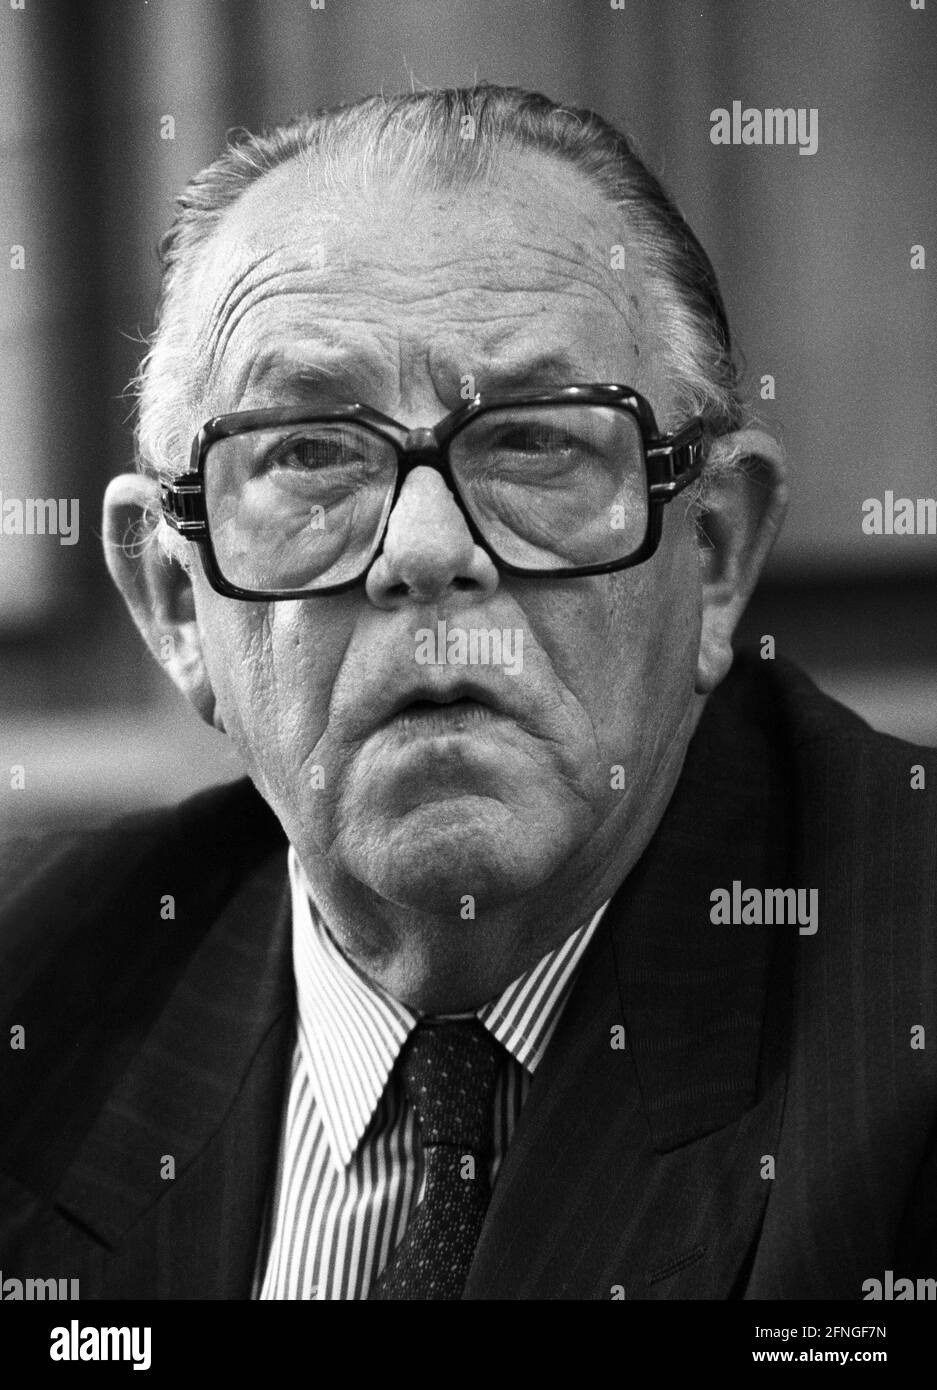 Germany, Bonn, 03.09.1990 Archive-No.: 20-11-32 Press conference with Middle East expert Wischnewski Photo: Hans-Juergen Wischnewski, Middle East expert of the SPD [automated translation] Stock Photo